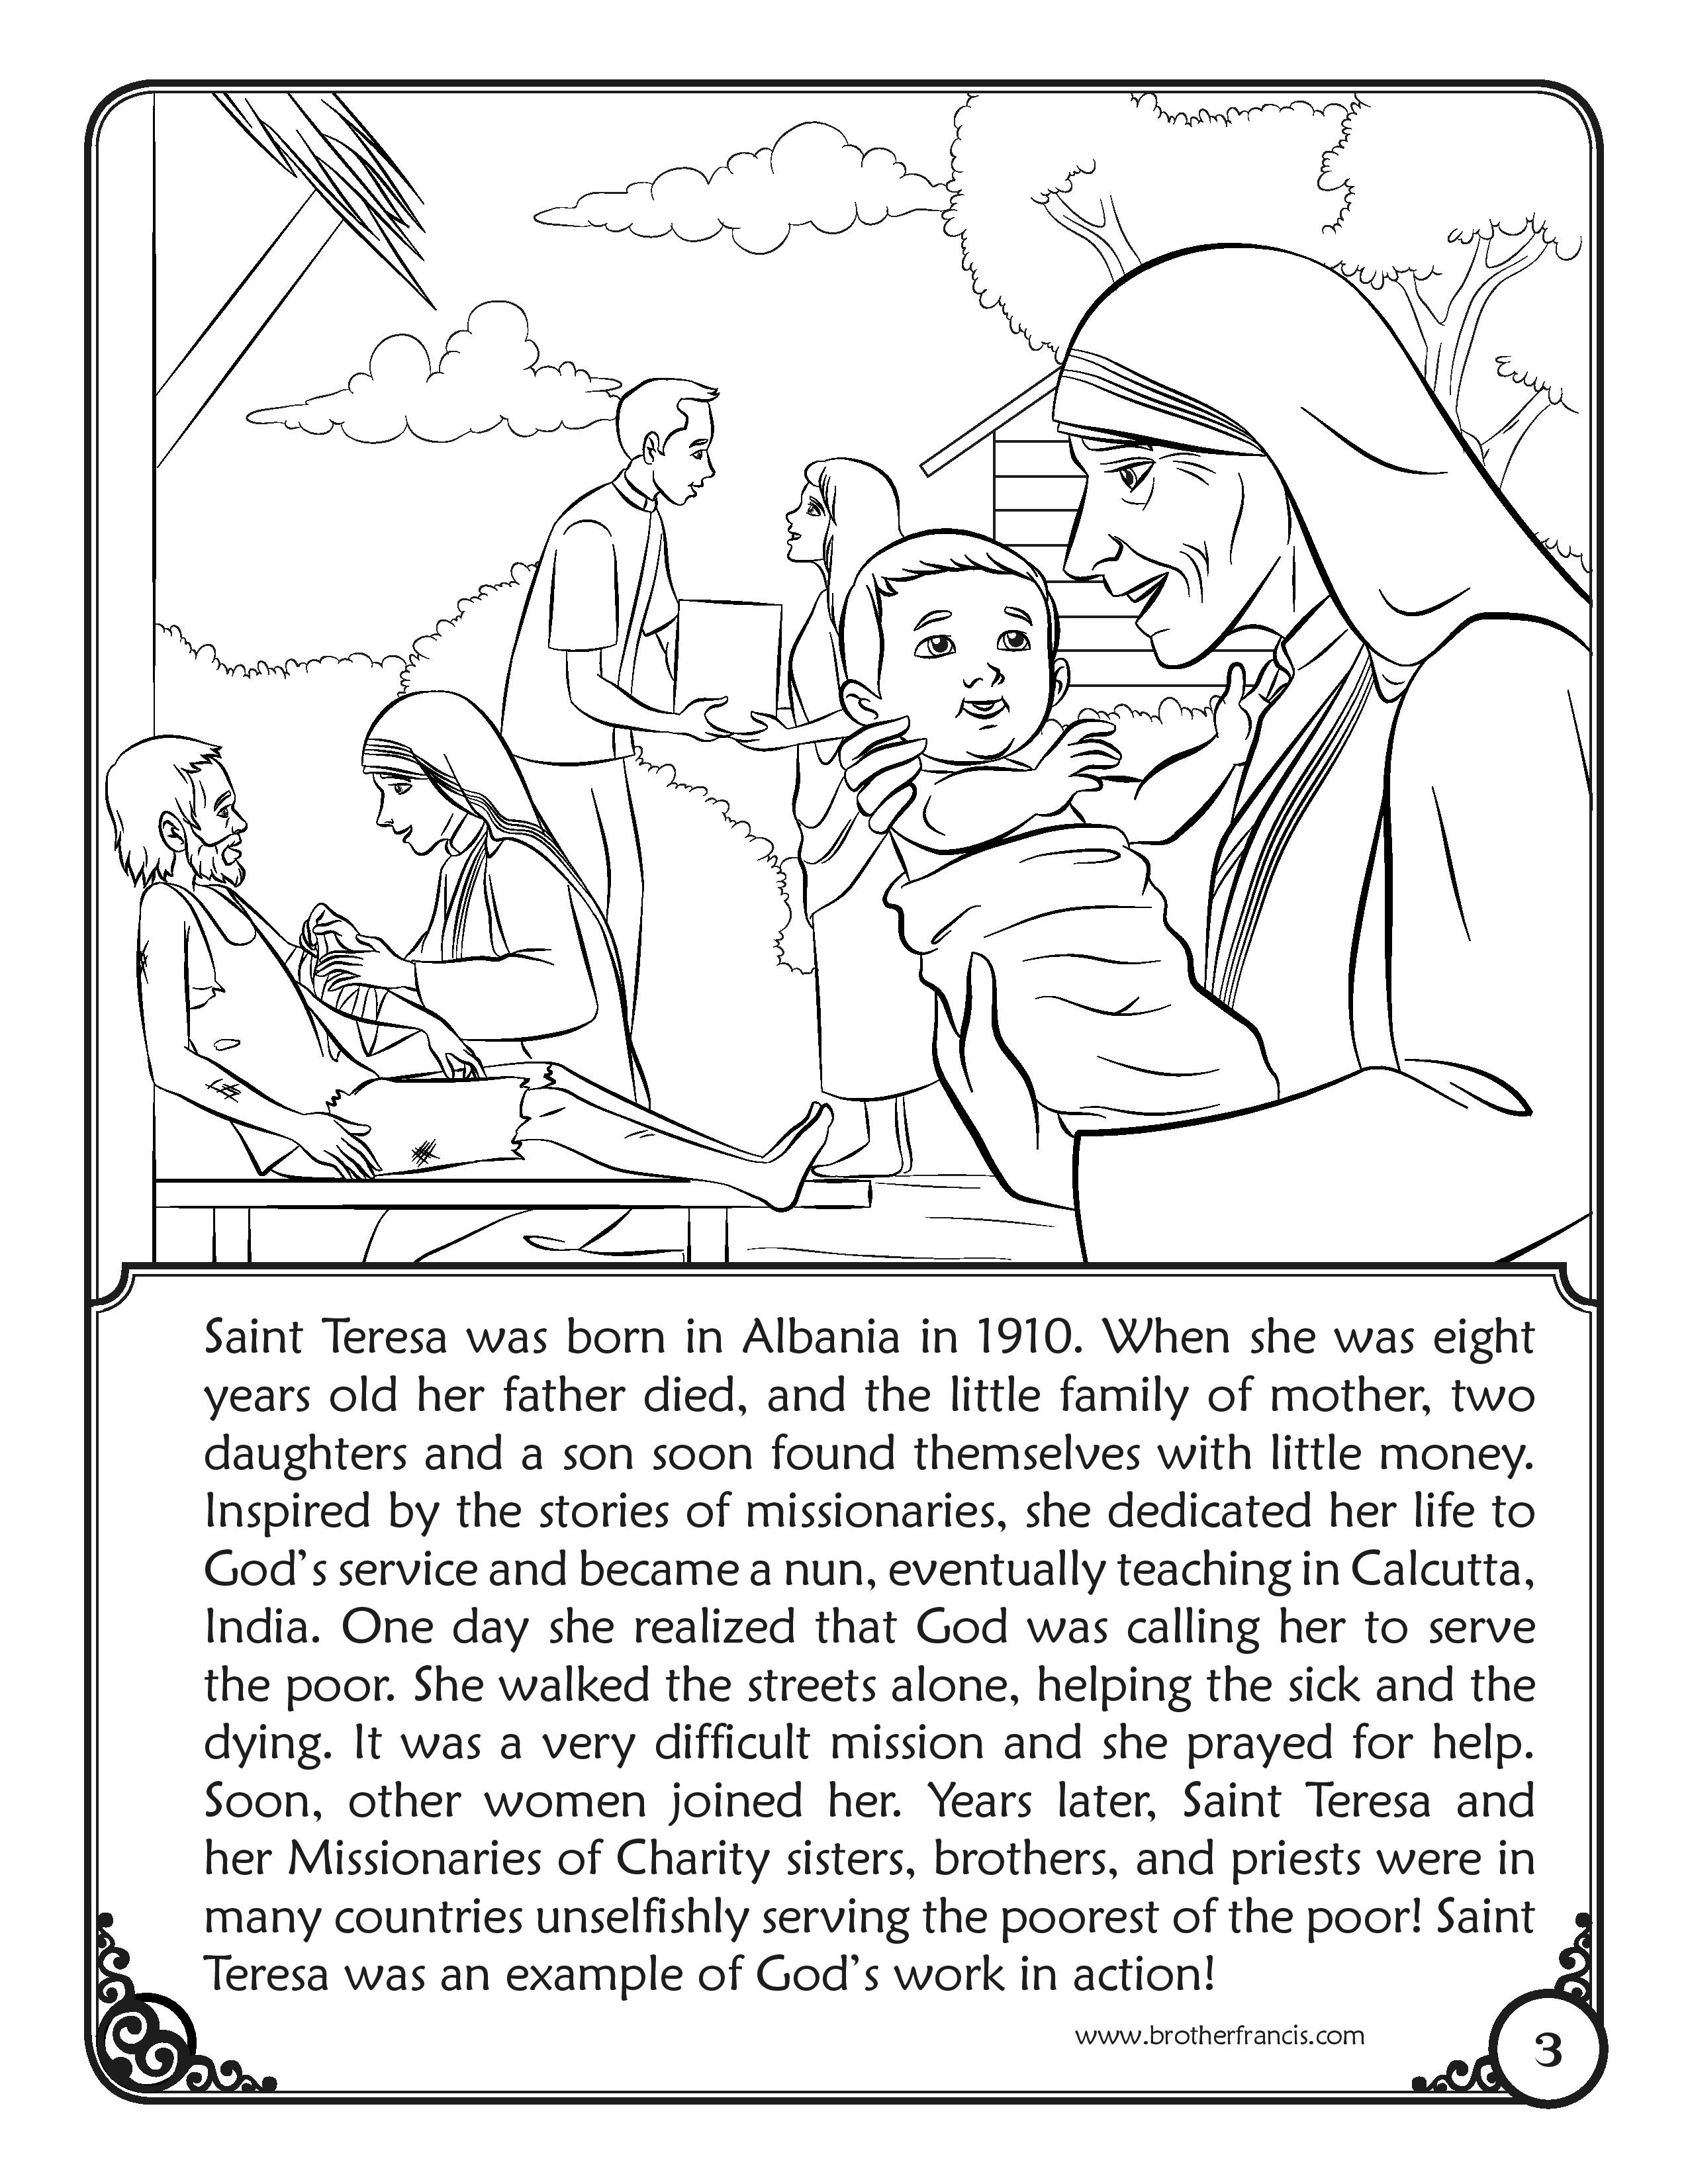 September 5_saint-teresa-calcutta-story-coloring-page-brother-francis-page-001